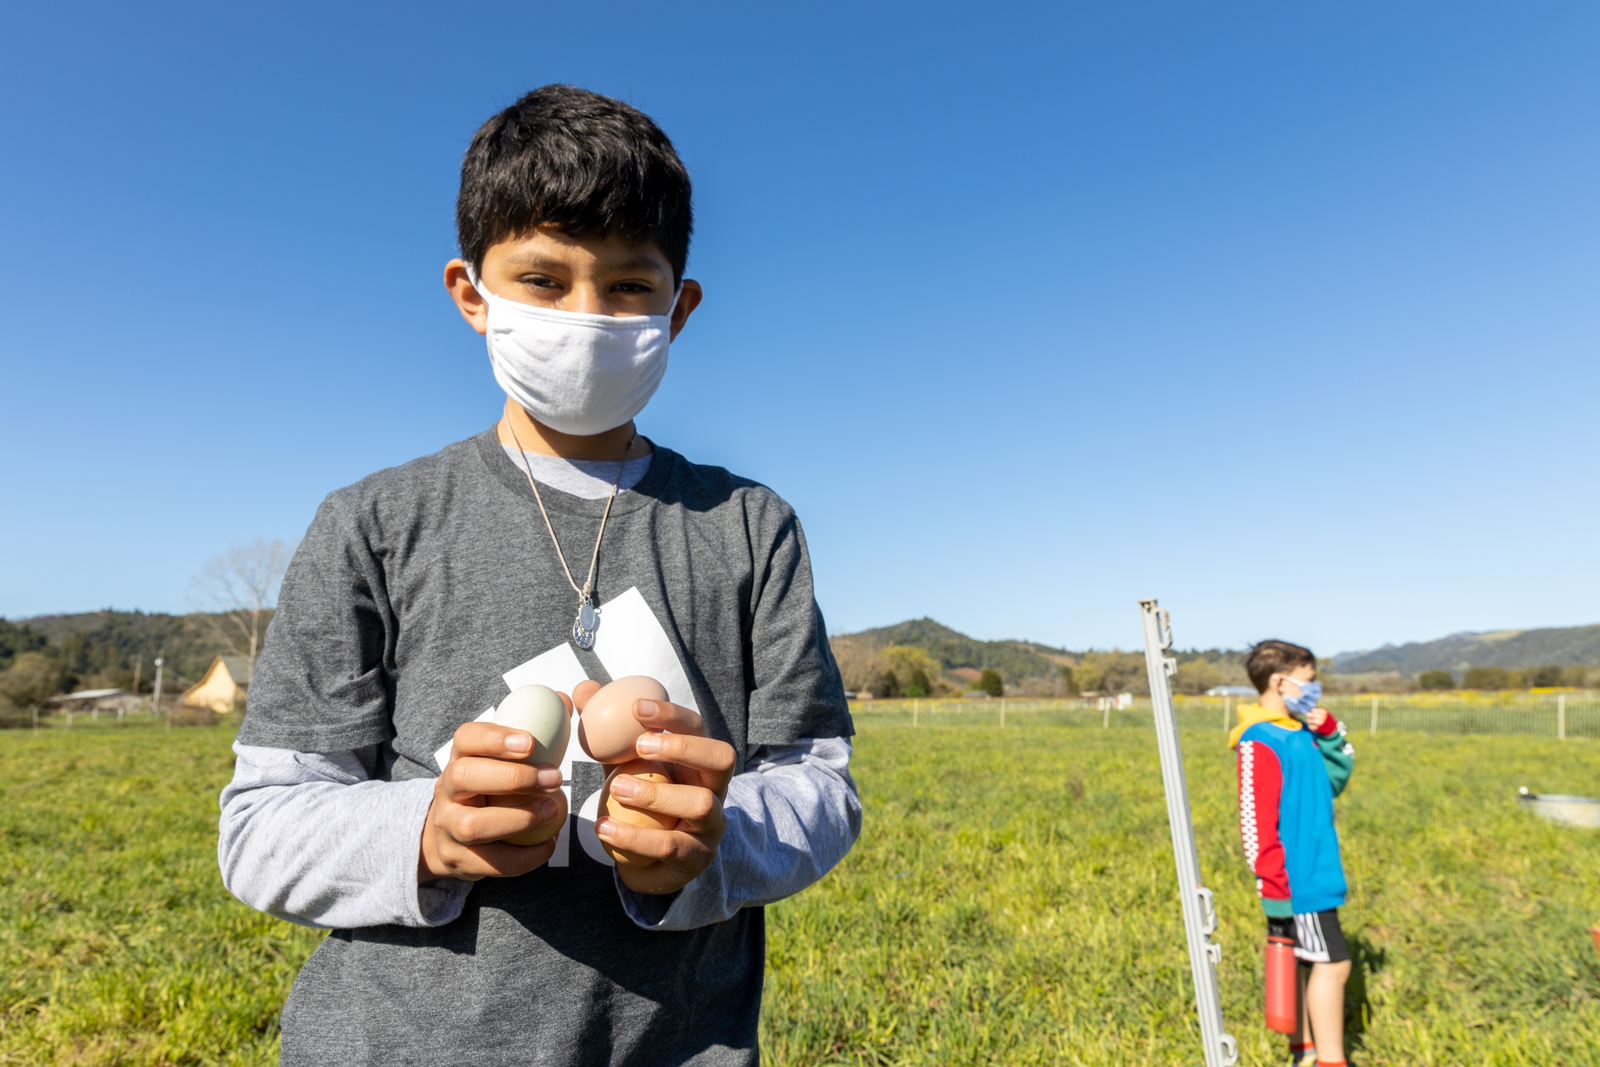 A boy on a farm wearing a white mask holding a chicken egg in each hand.